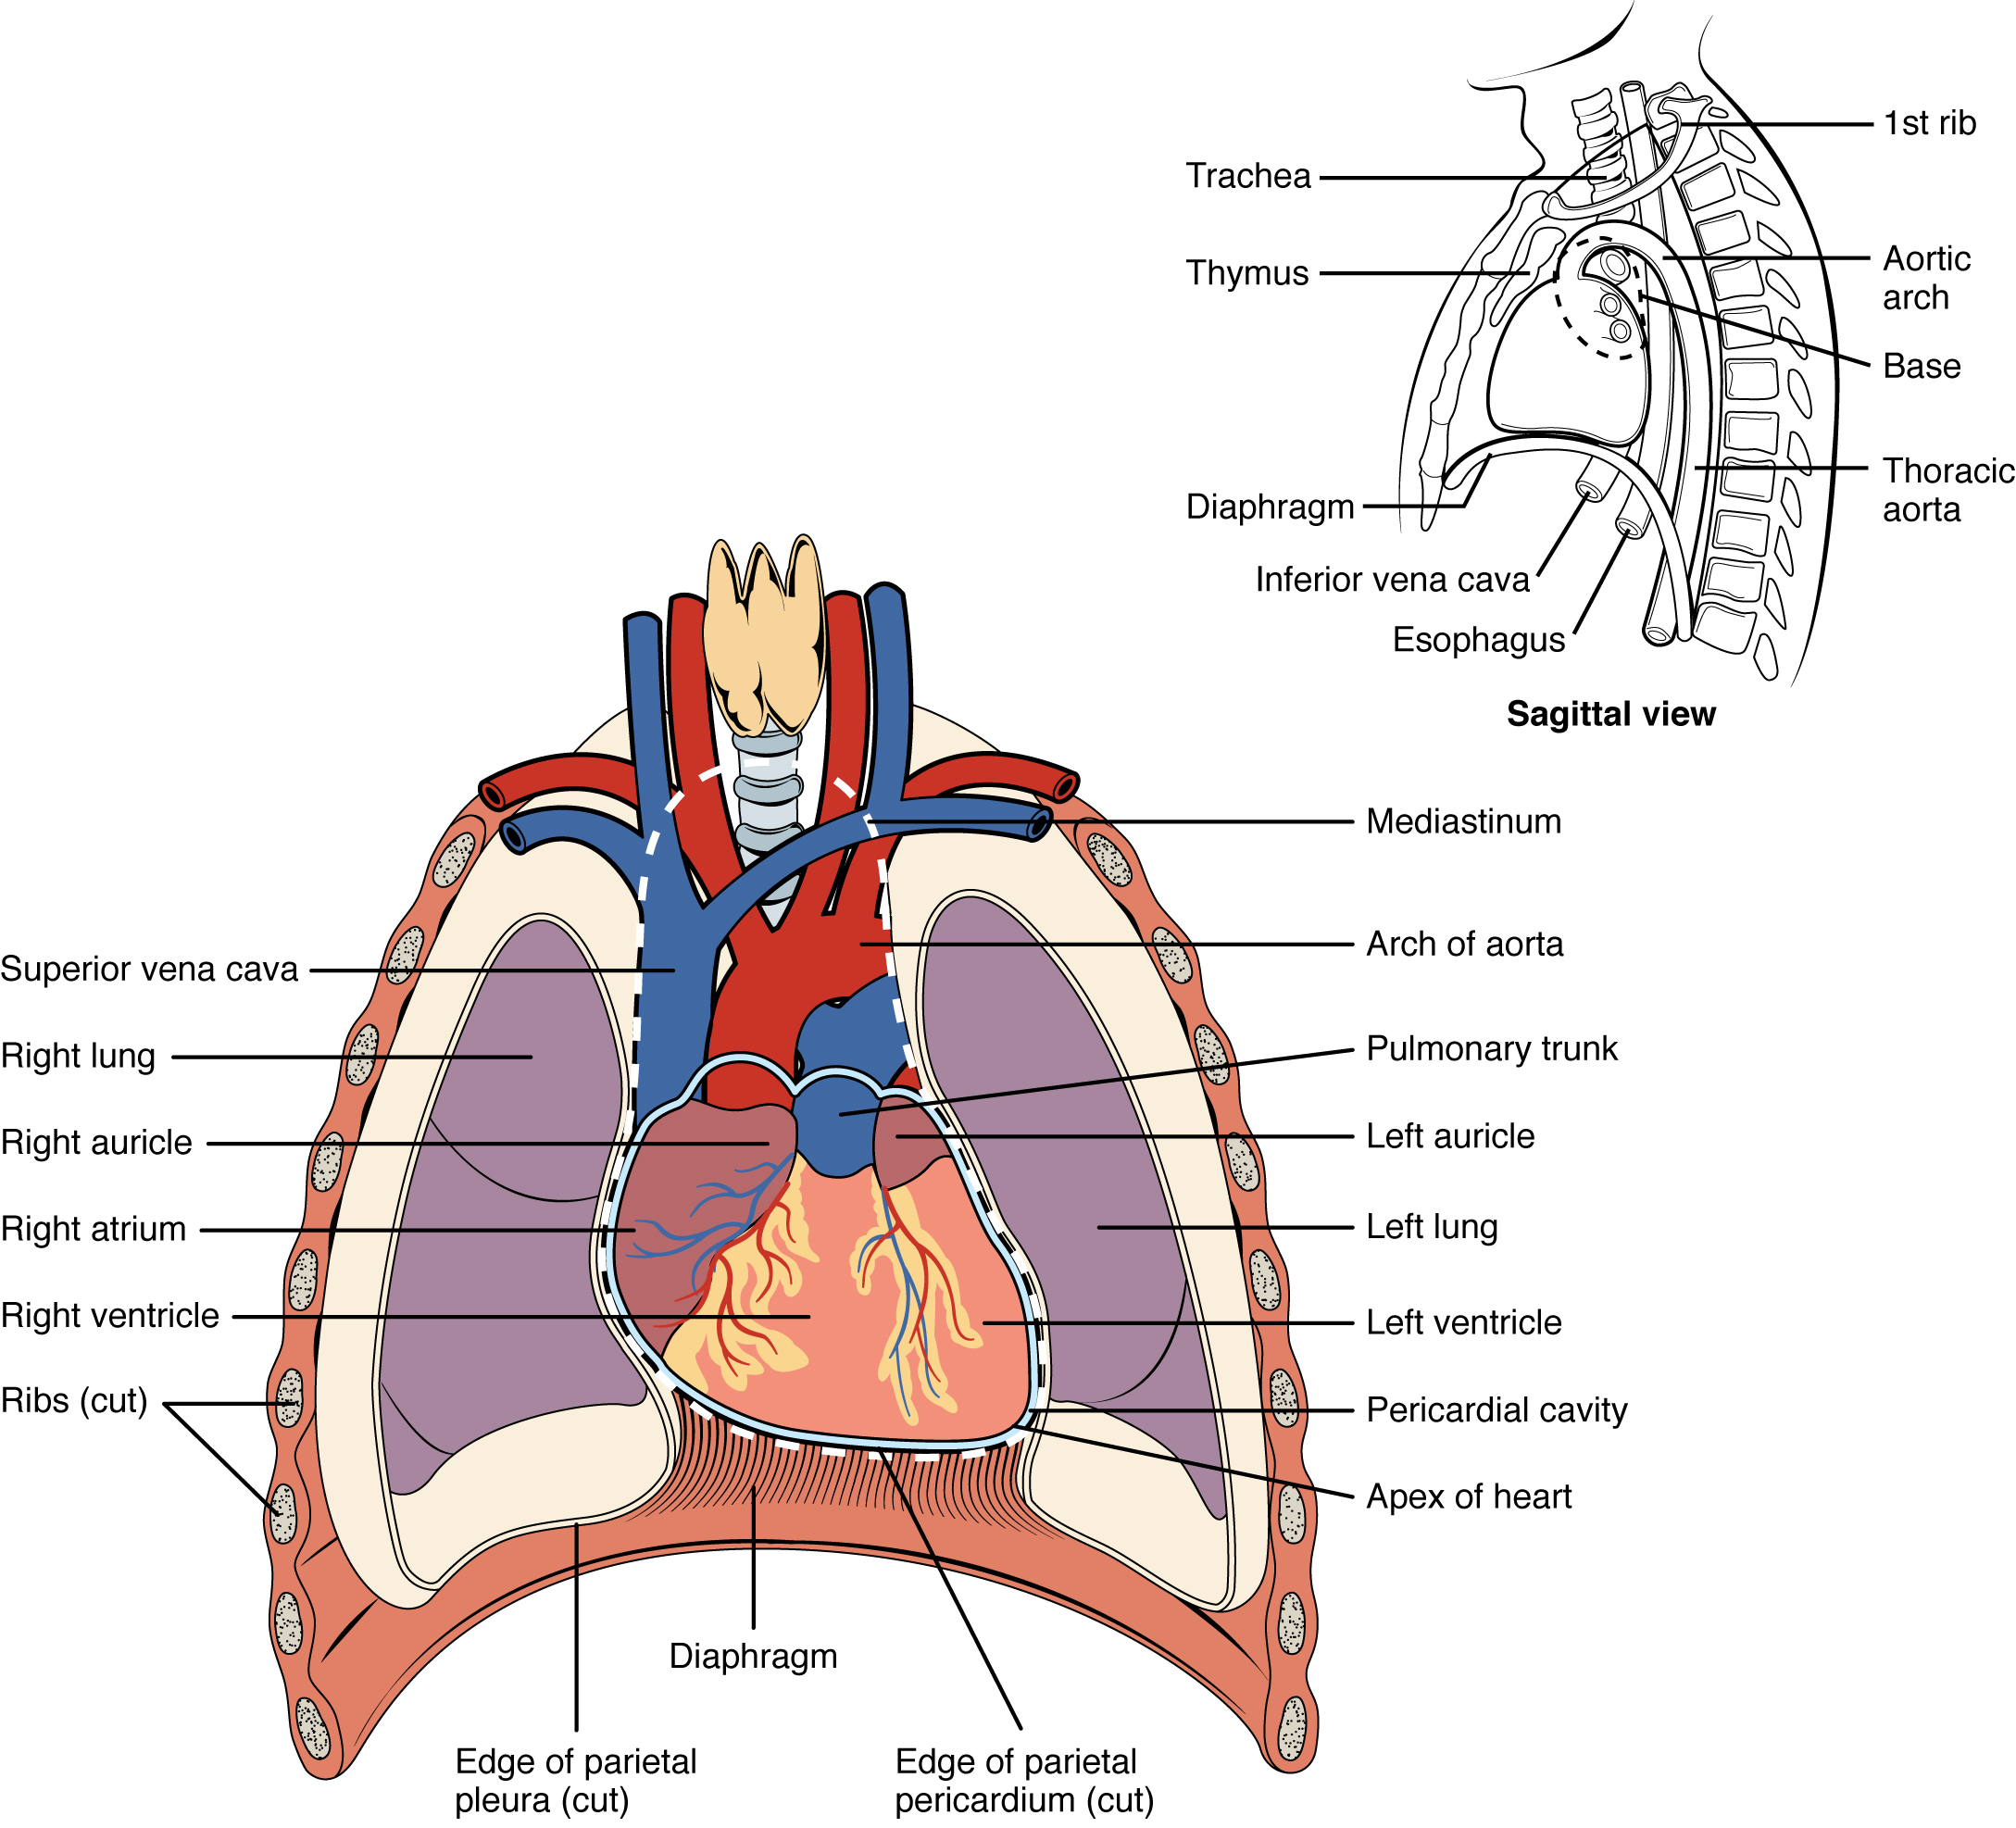 Location of the heart in the thorax. Image description available.